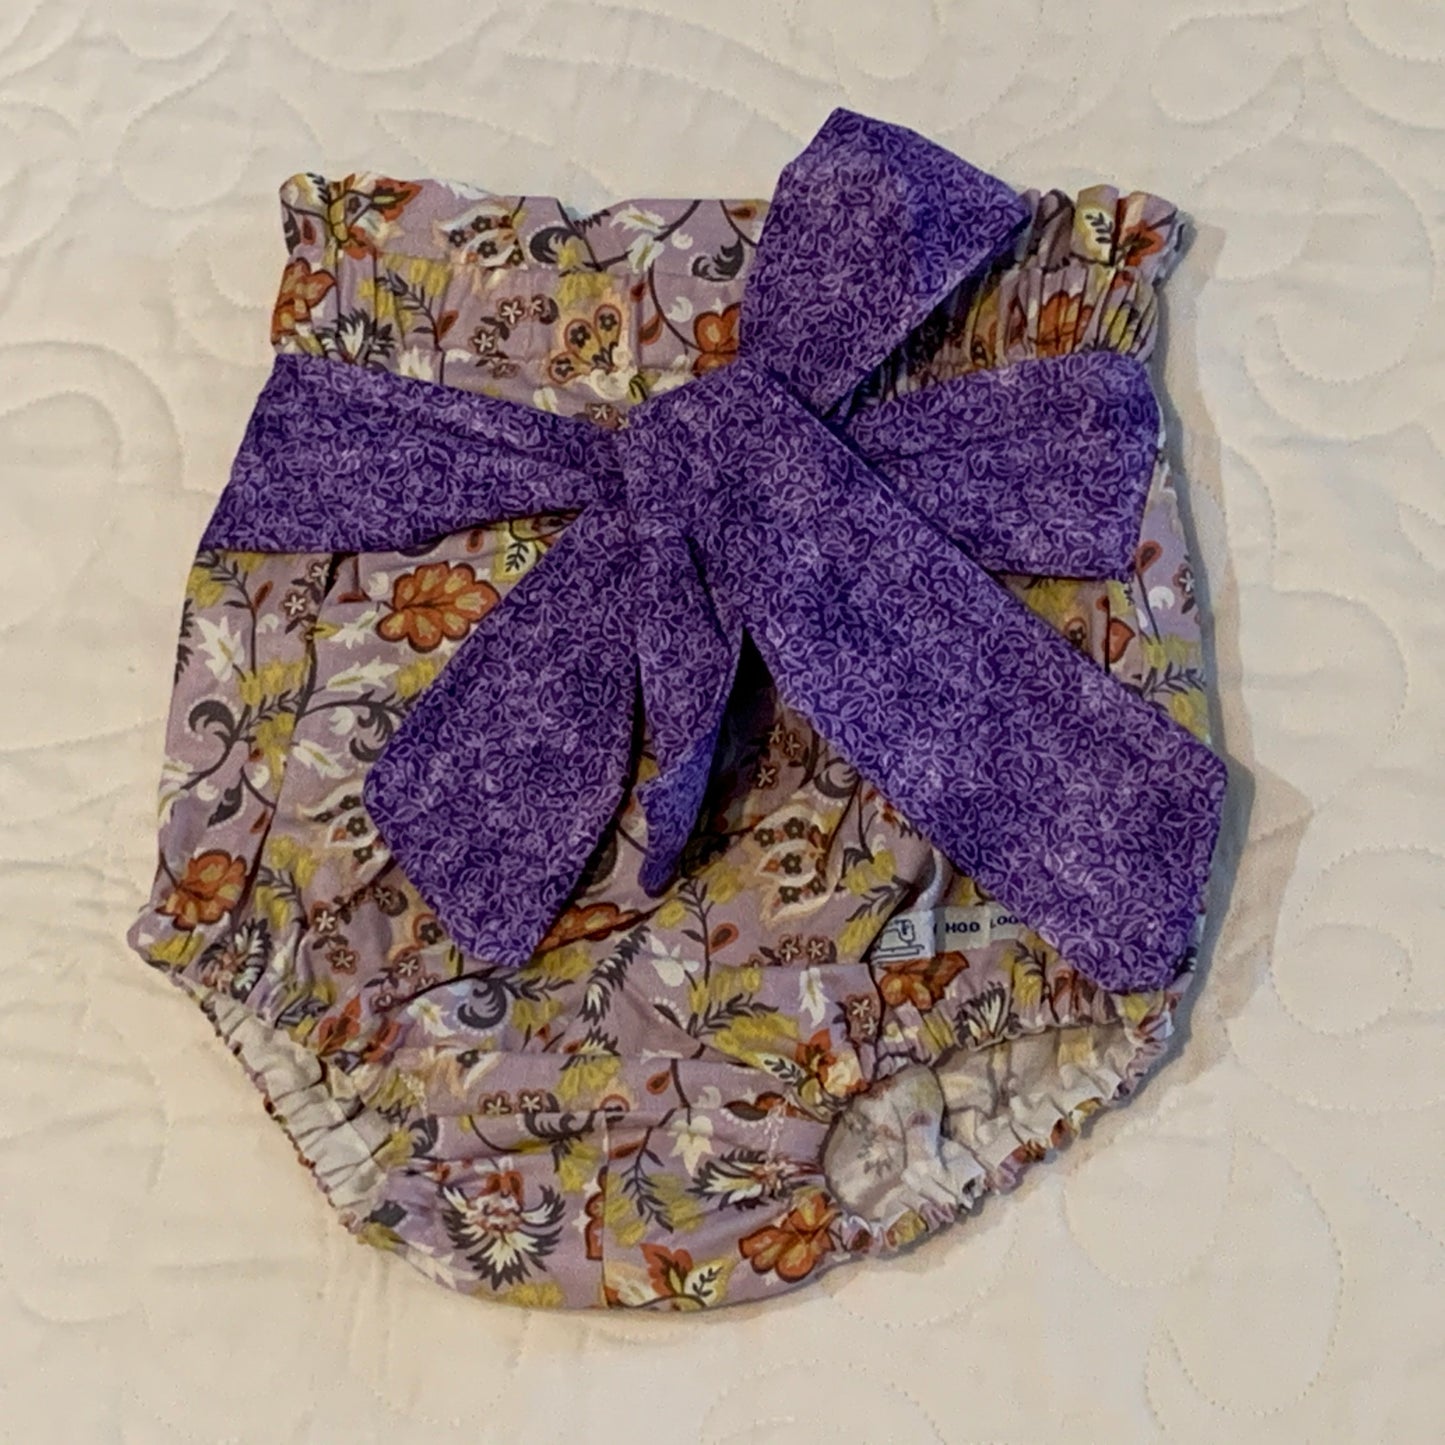 2 Piece Set - High Waisted Nappy Cover with Sash Bow & ReadyMade Long Sleeve Bodysuit